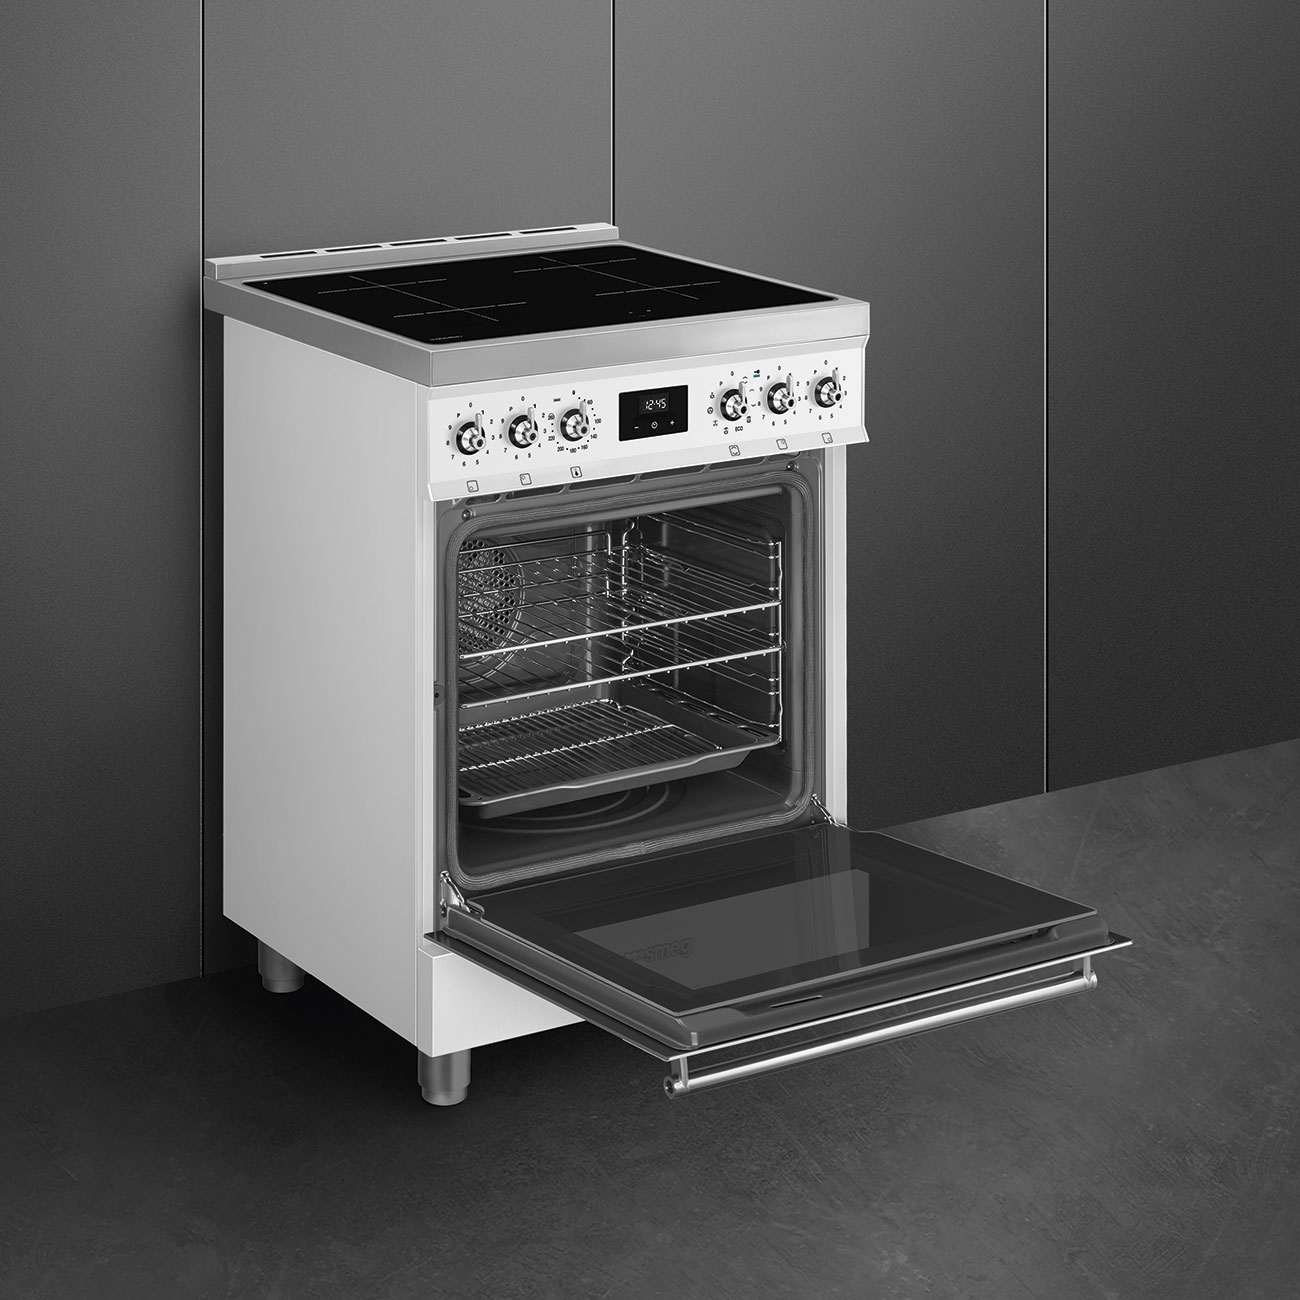 Smeg White Cooker with Induction Hob_5